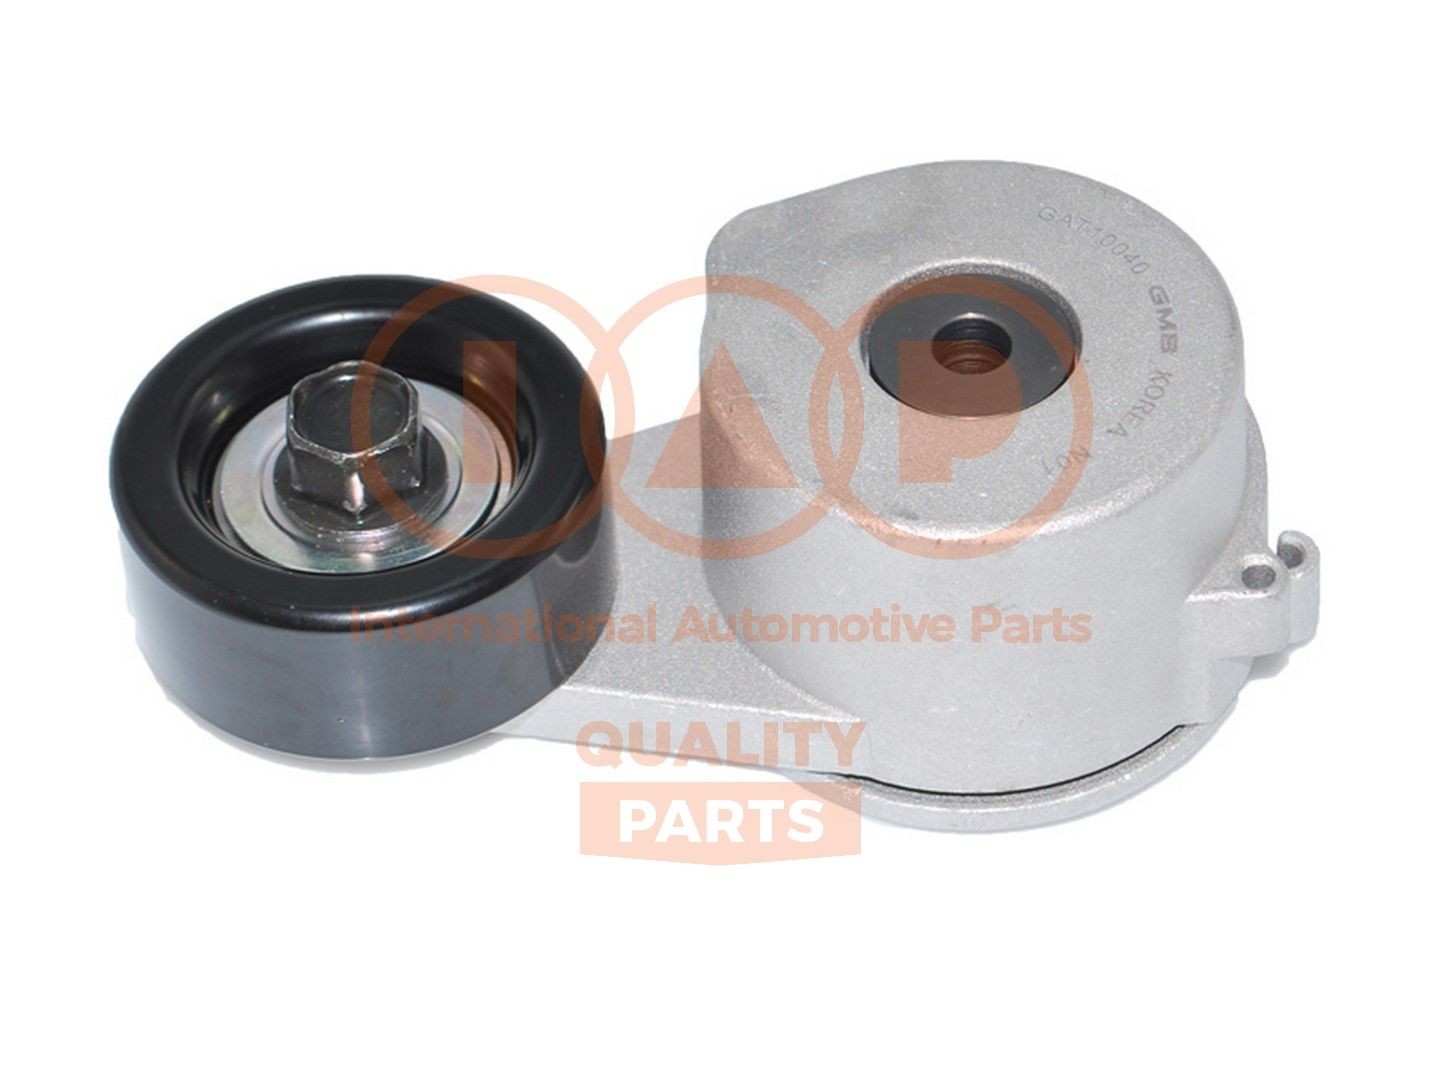 IAP QUALITY PARTS 127-07002 Tensioner pulley 25281-2F002